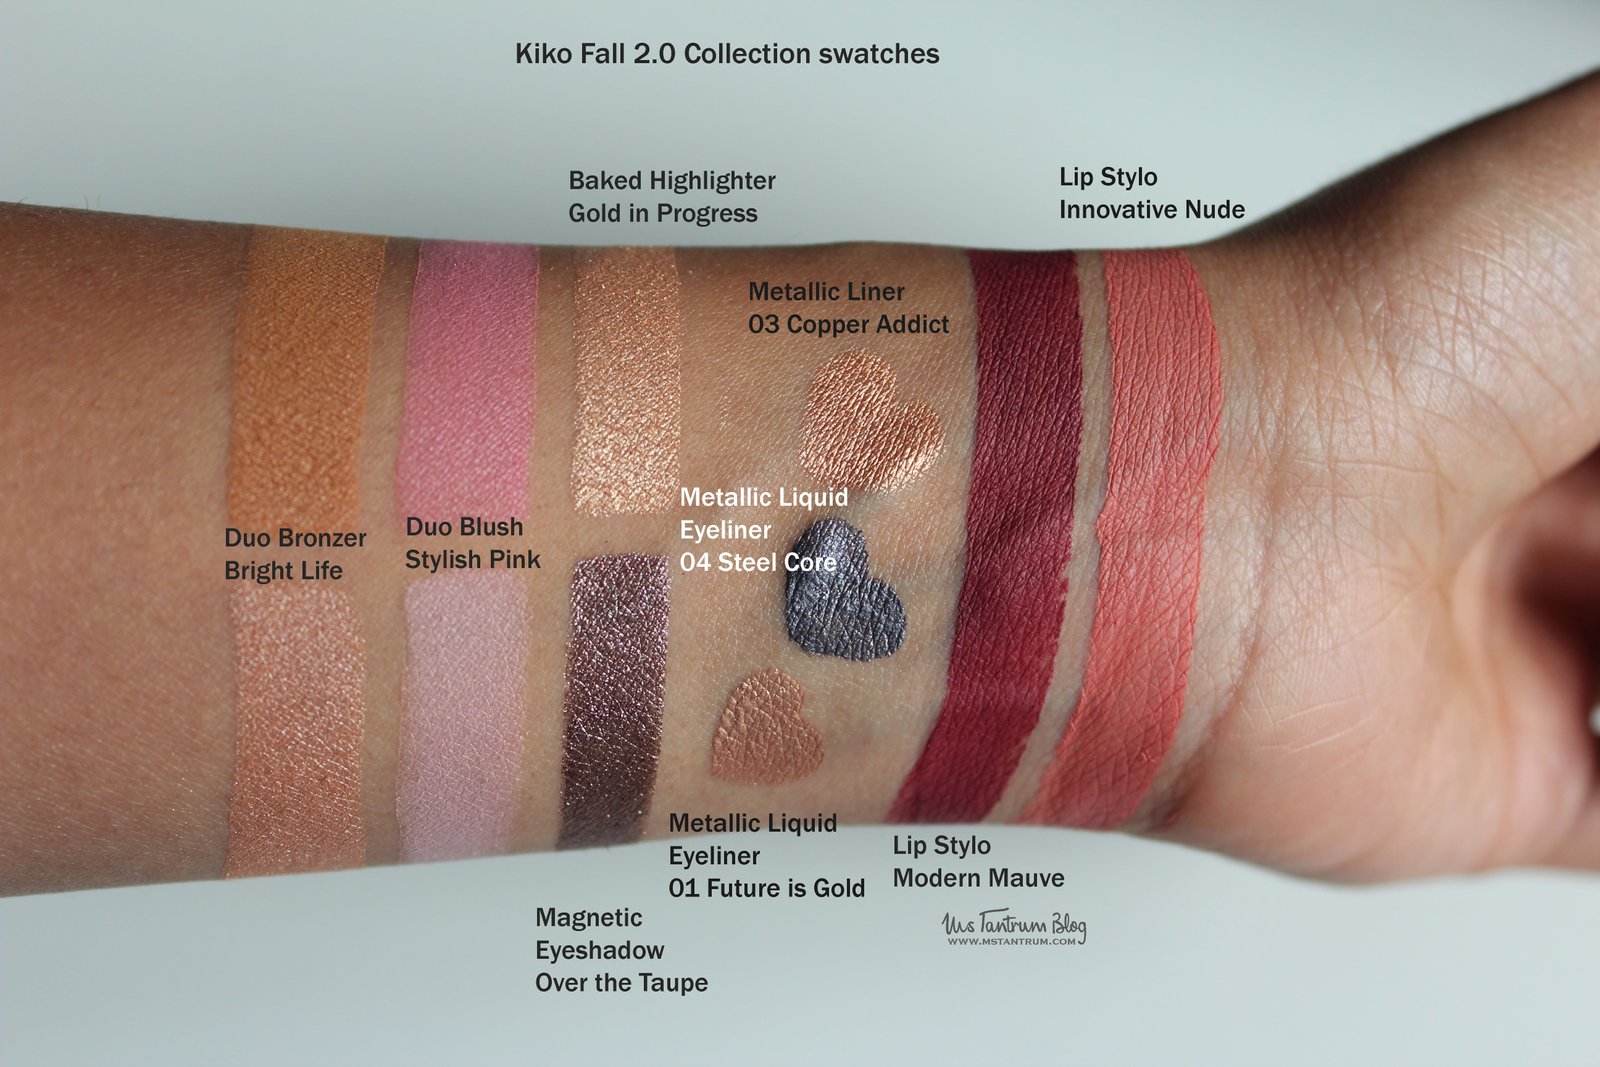 Kiko Fall 2.0 collection swatches